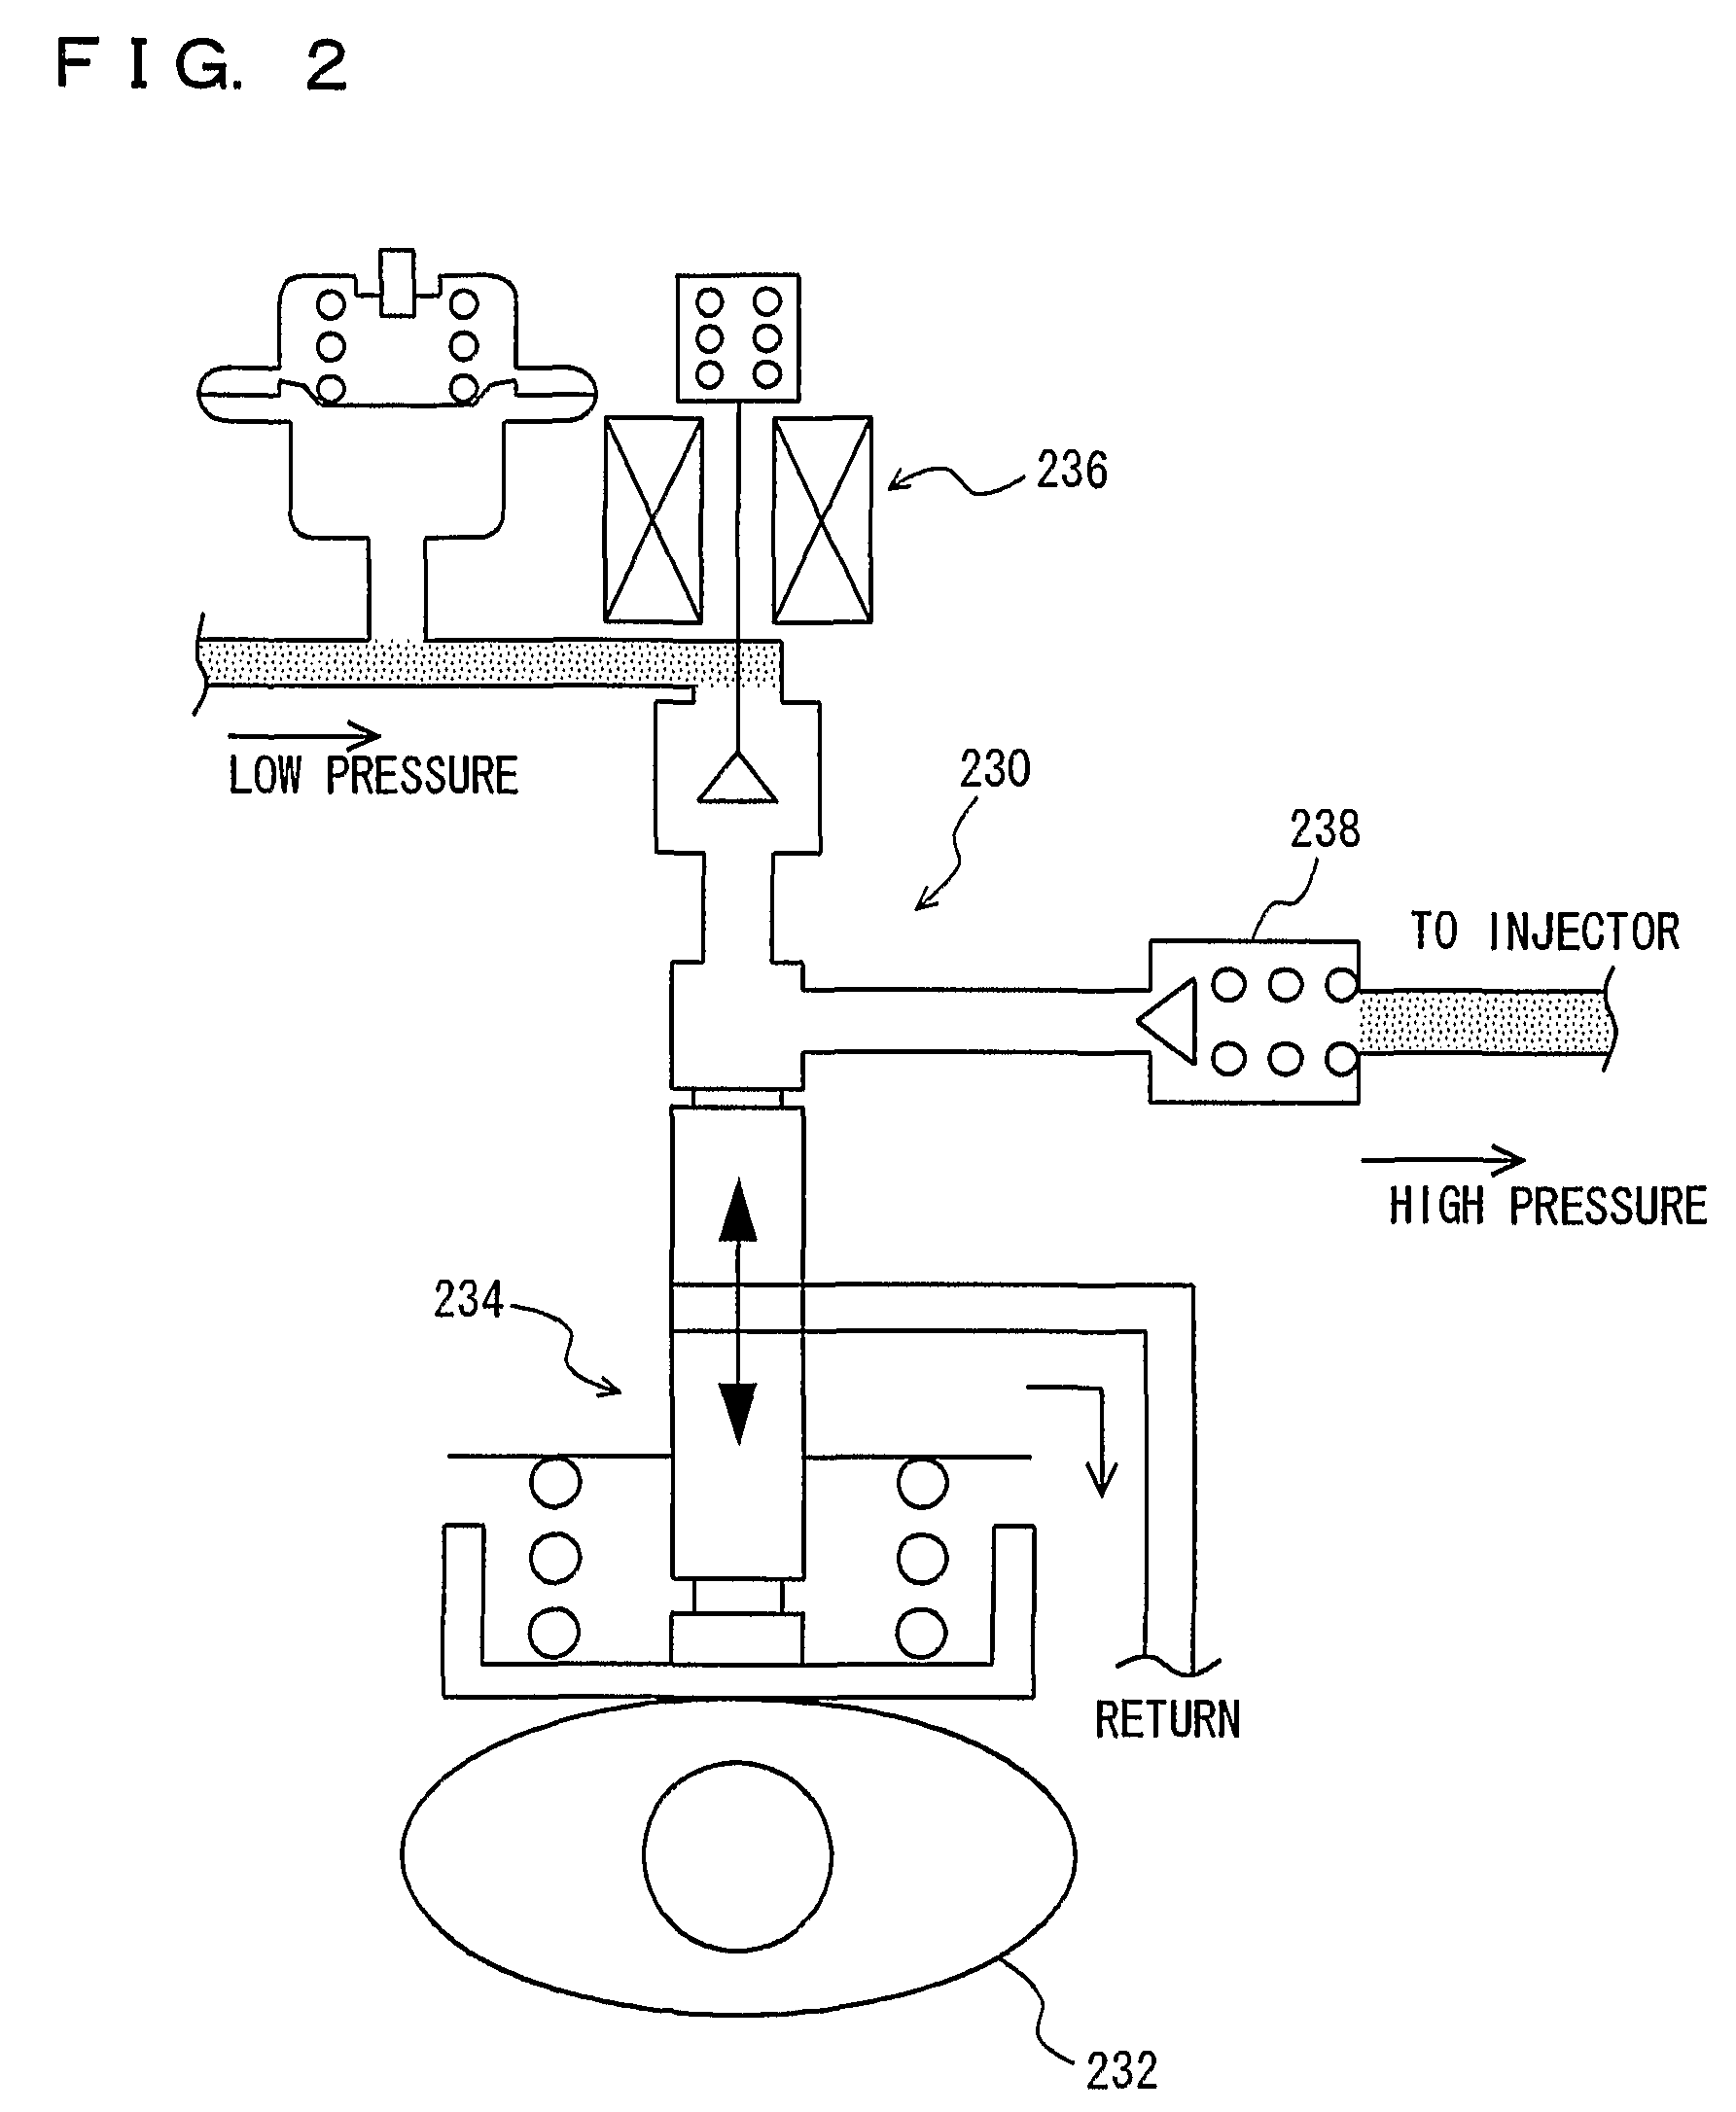 Fuel pressure control apparatus for an internal combustion engine